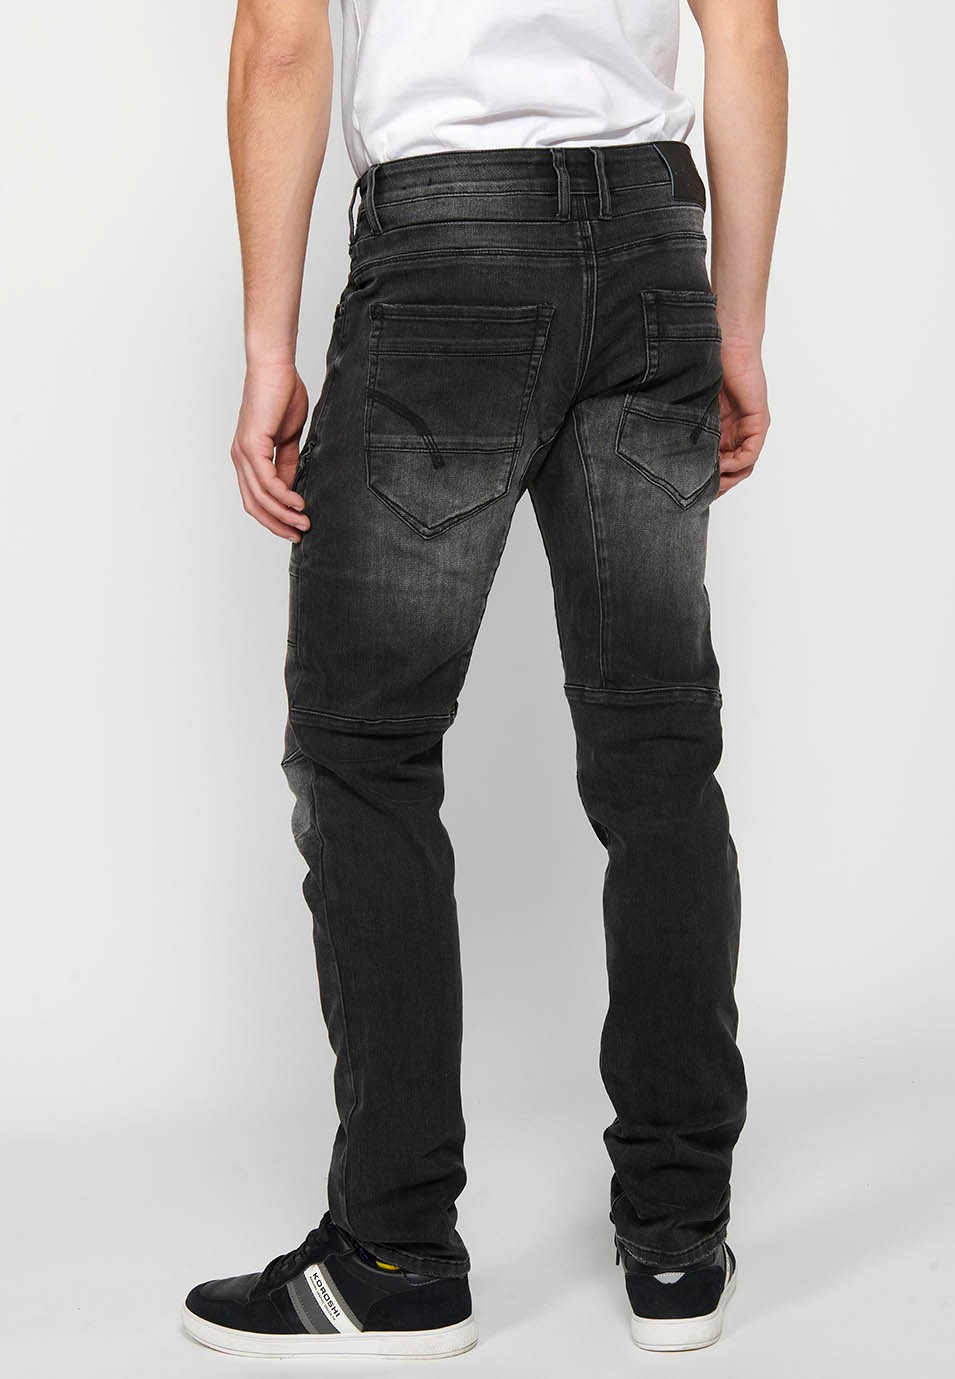 Long denim pants with front closure with zipper and button and pockets, two sides in Black for Men 4